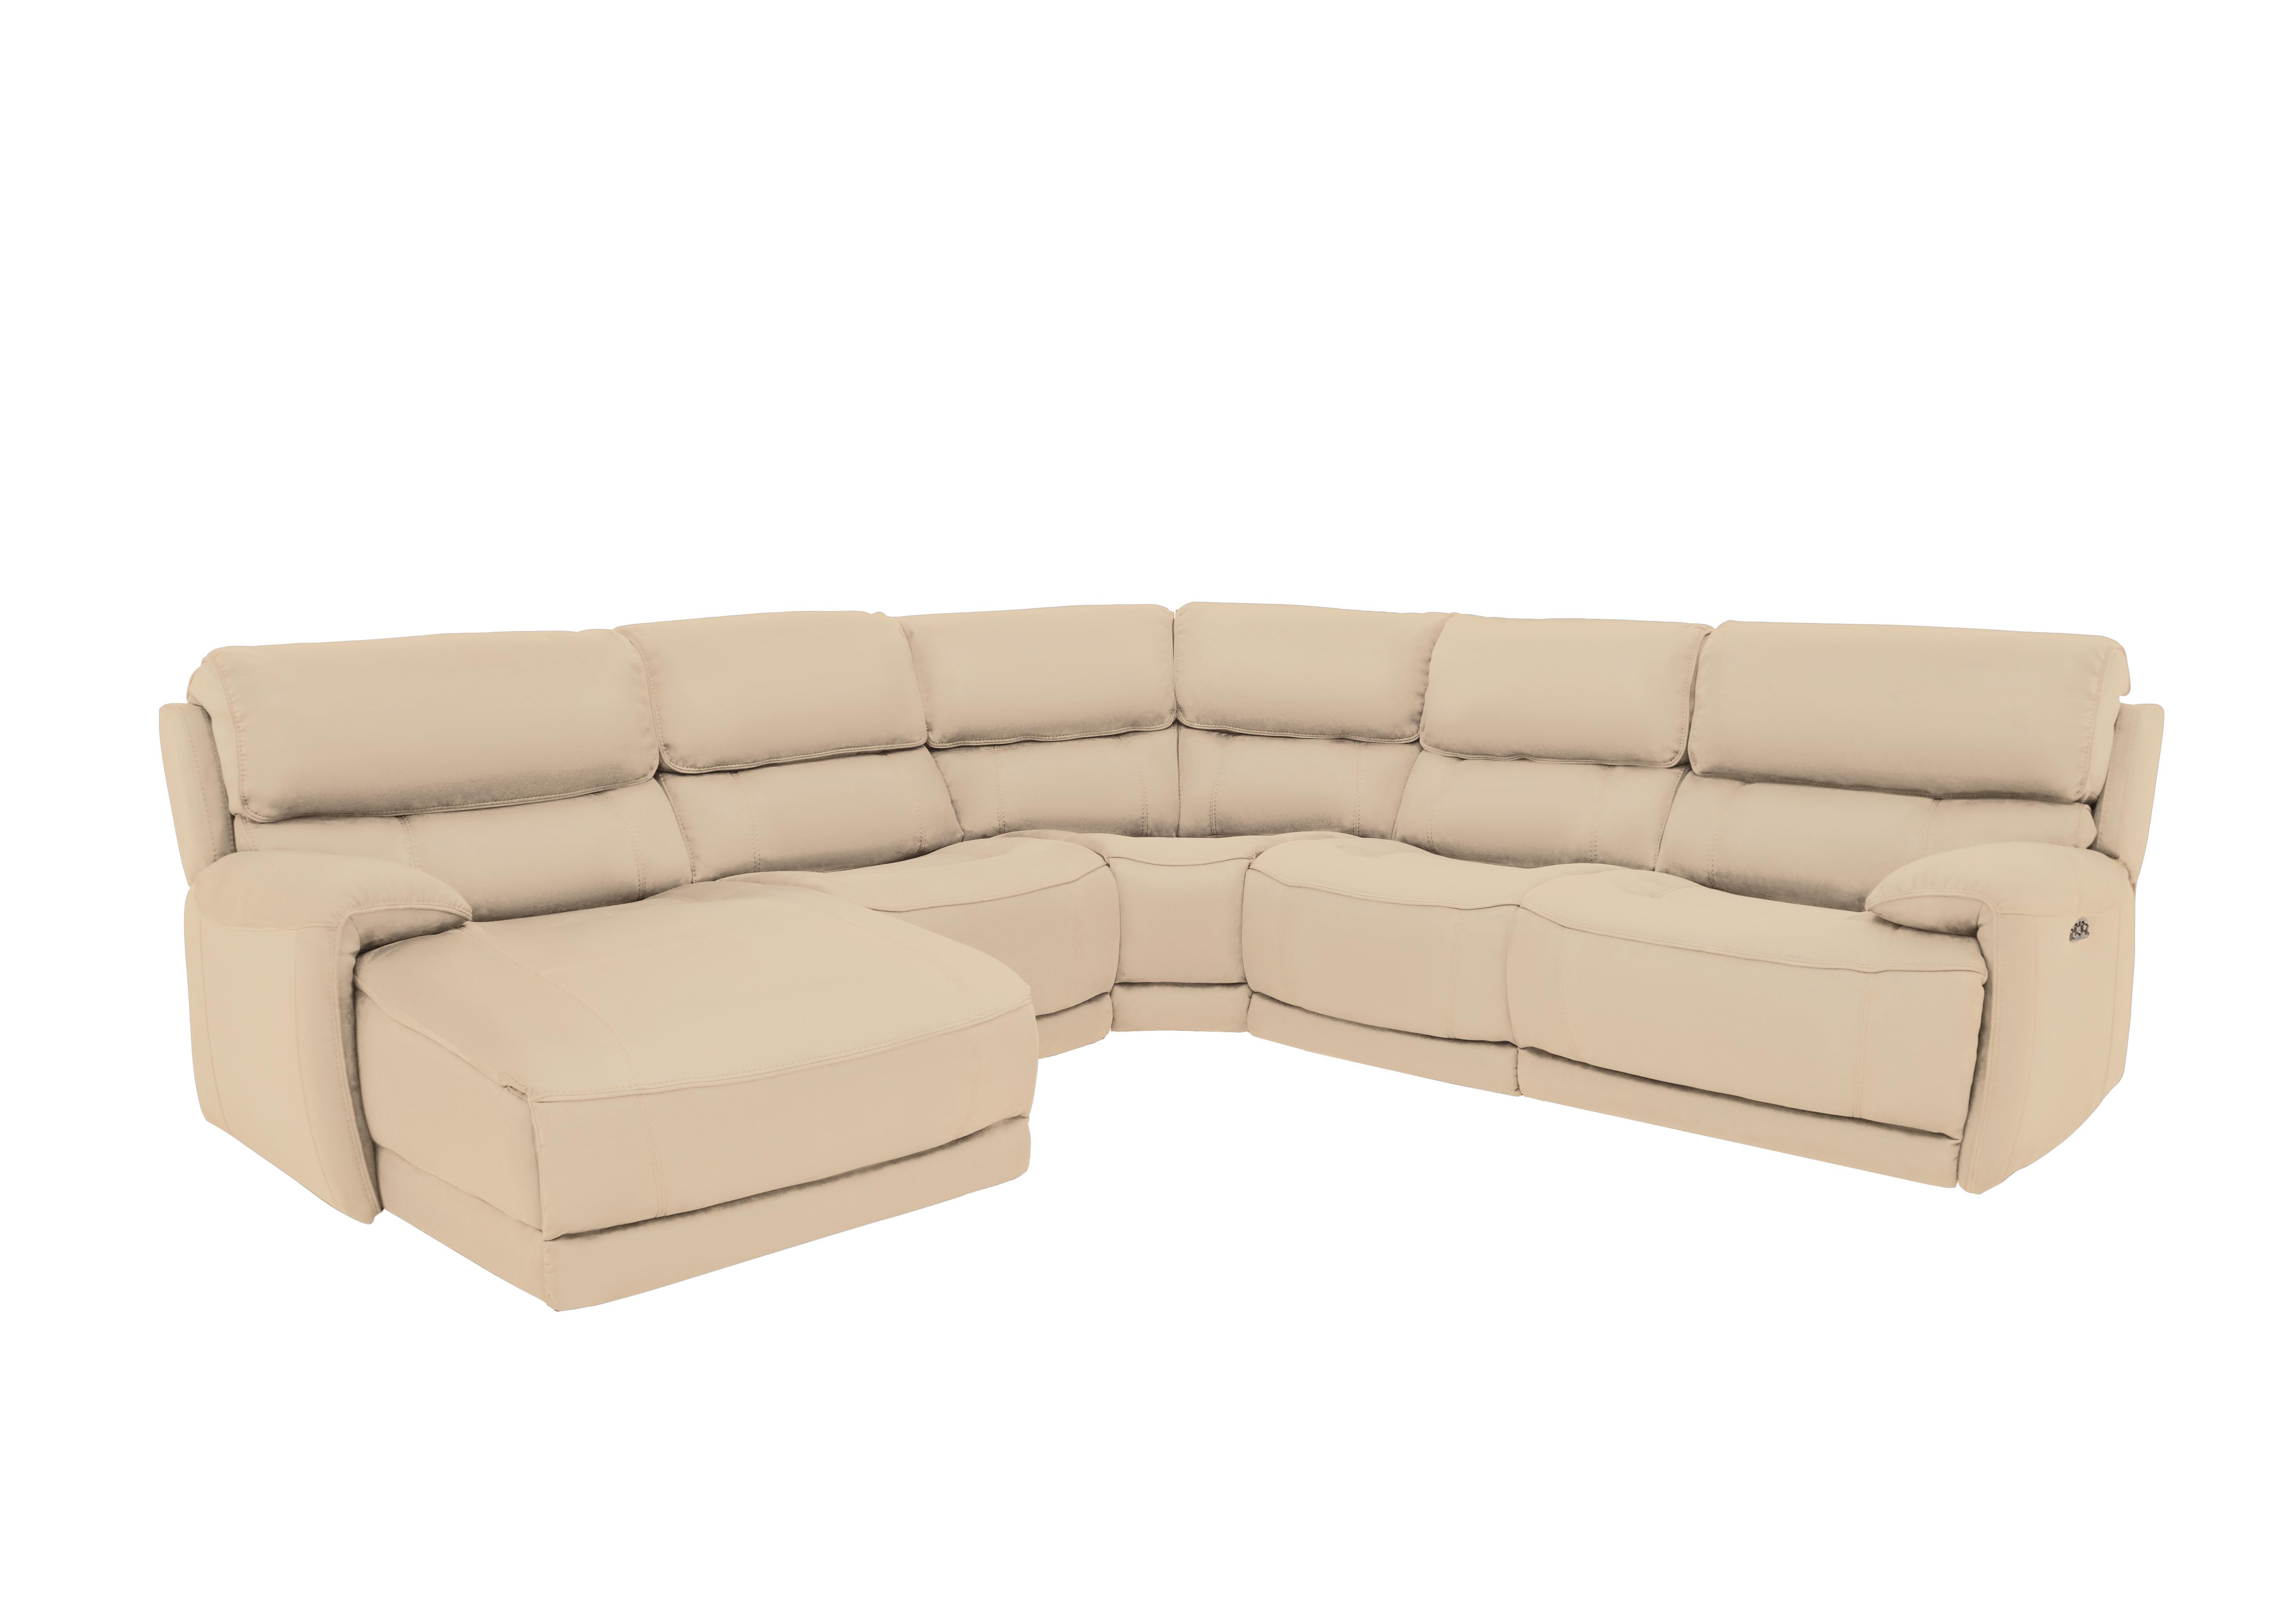 Link Leather Corner Chaise Power Sofa in Bv-862c Bisque on Furniture Village